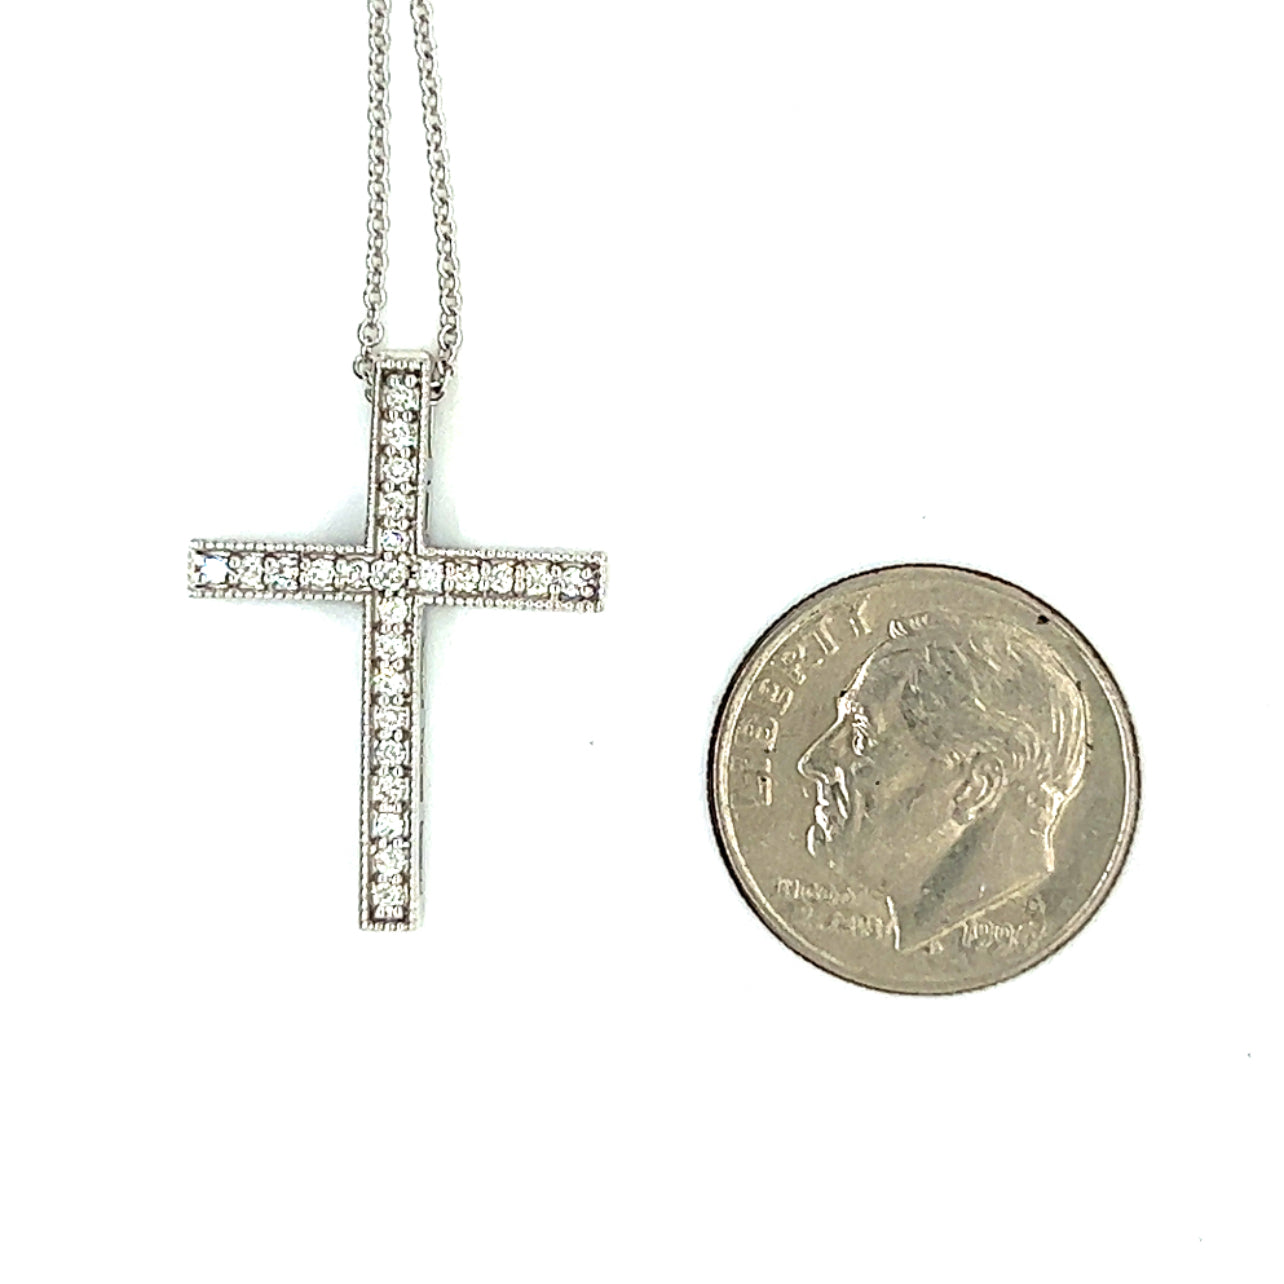 Natural Diamond Cross Pendant with Chain 17" 14k W Gold 0.25 CT Certified $2,950 307922 - Certified Fine Jewelry